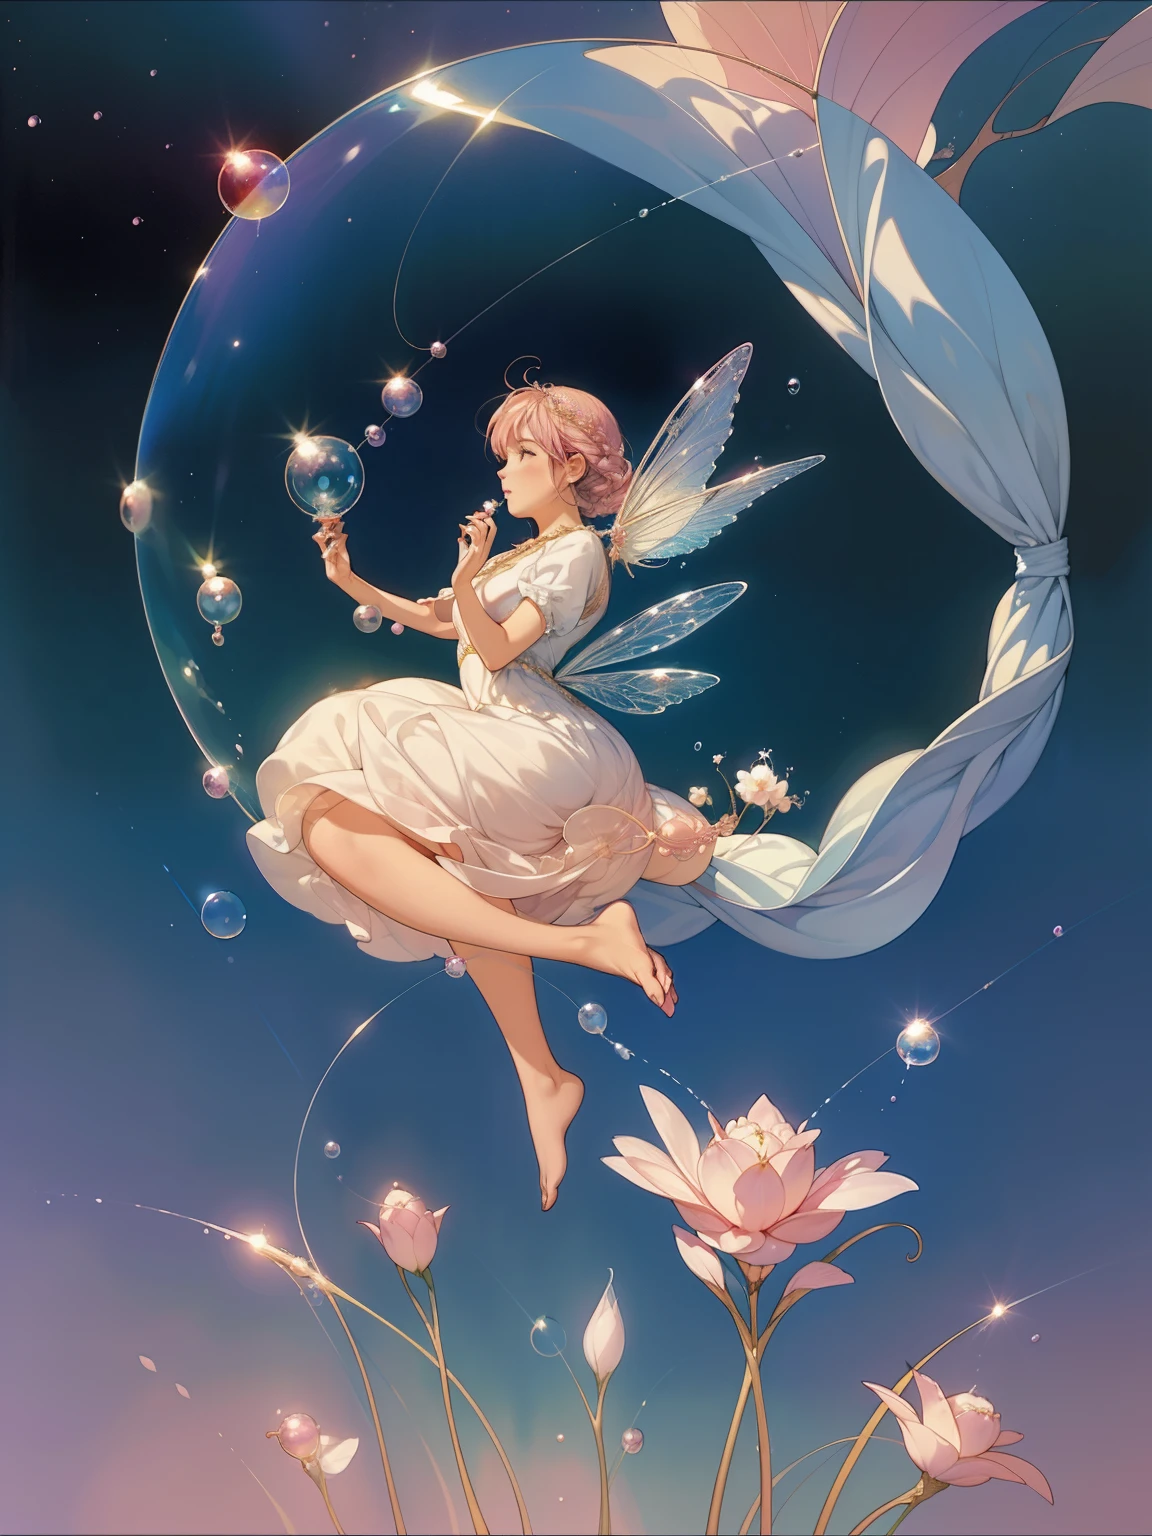 A woman blowing soap bubbles wearing a dress, ethereal and whimsical bubbles, Moebius style and whimsical, dreamlike details, intricate whimsical, close-up fantasy using water magic, fairy tale artwork, fairy tale painting, in the style of Anna Dittmann, whimsical art, realistic fantasy painting, art jam Julie Bell Beeple